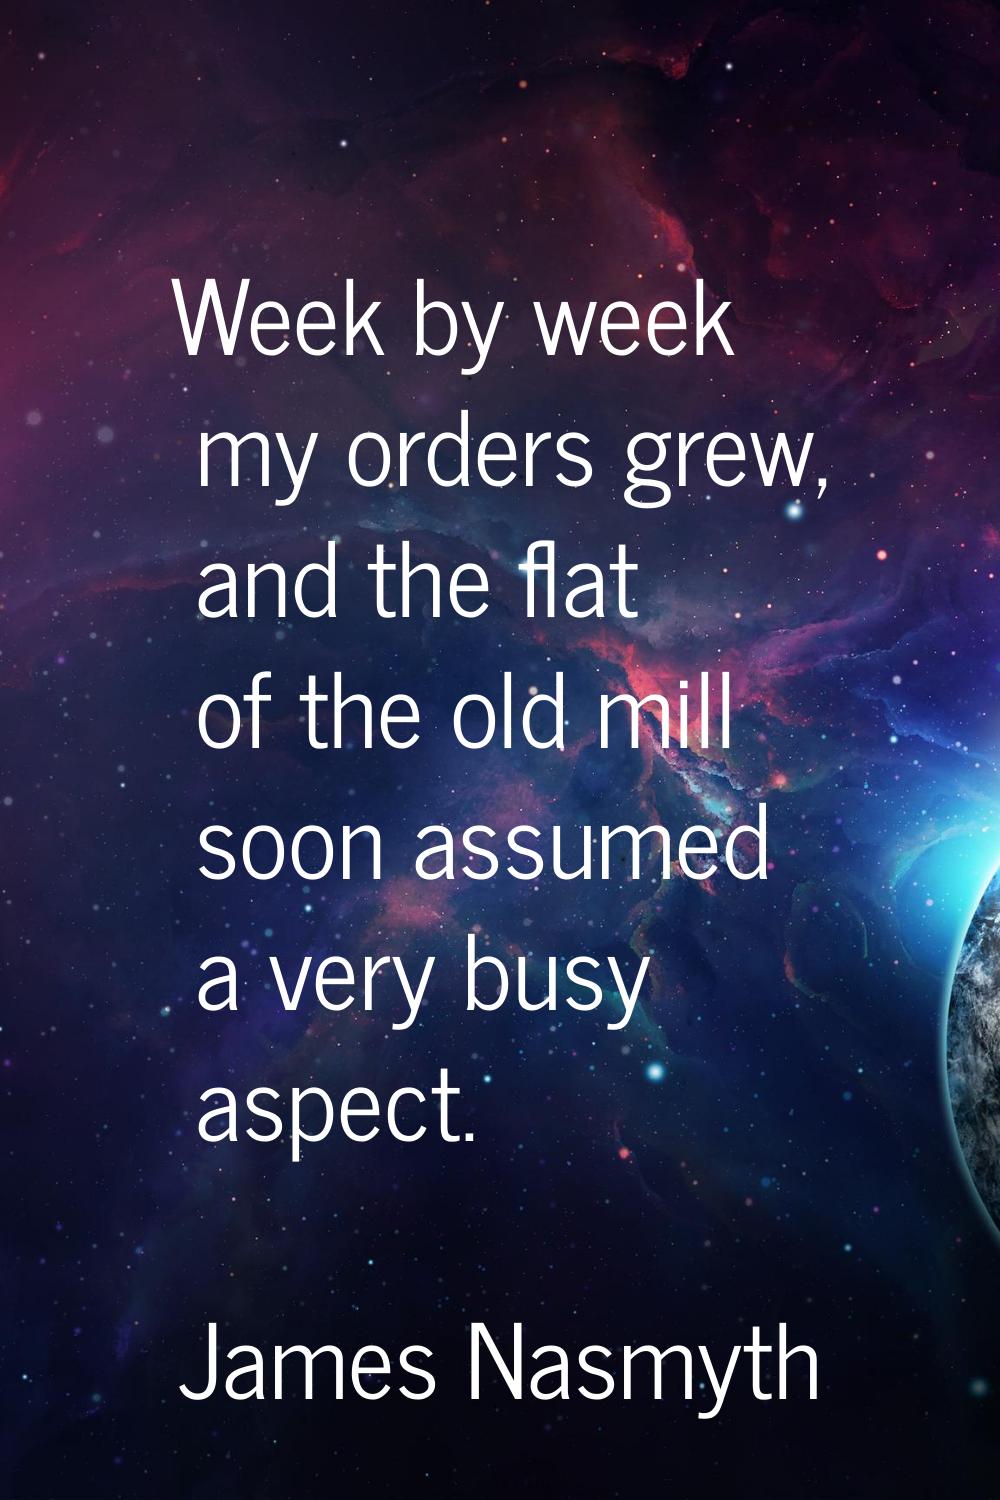 Week by week my orders grew, and the flat of the old mill soon assumed a very busy aspect.